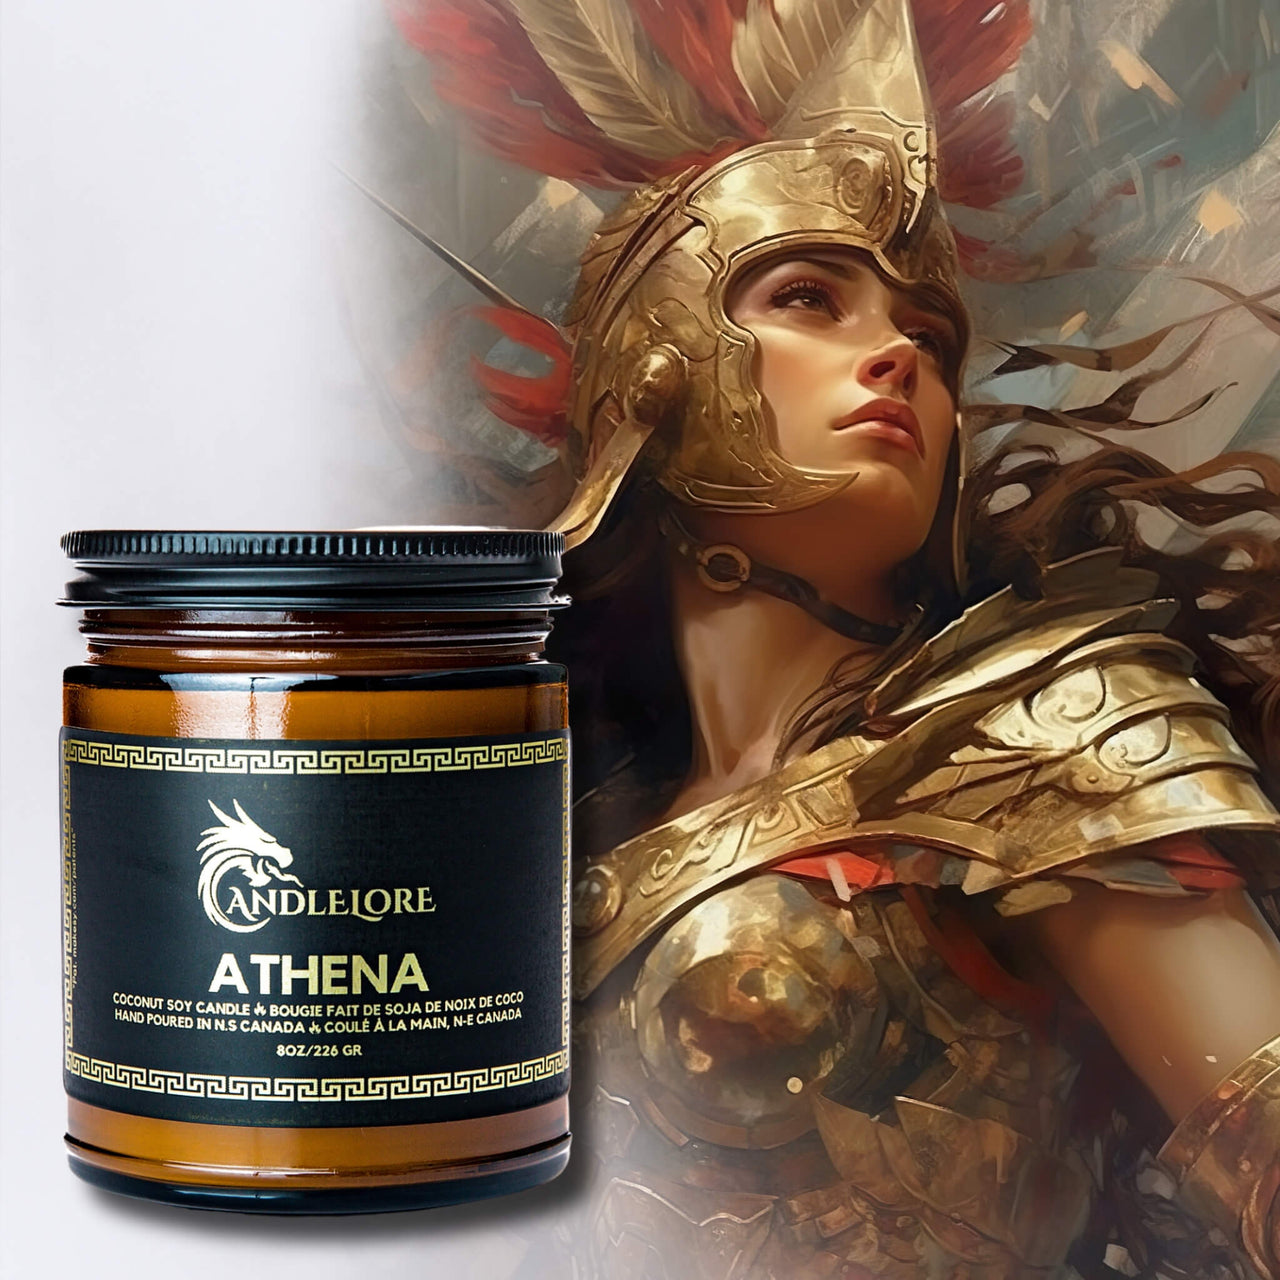 Athena with a candle to her left